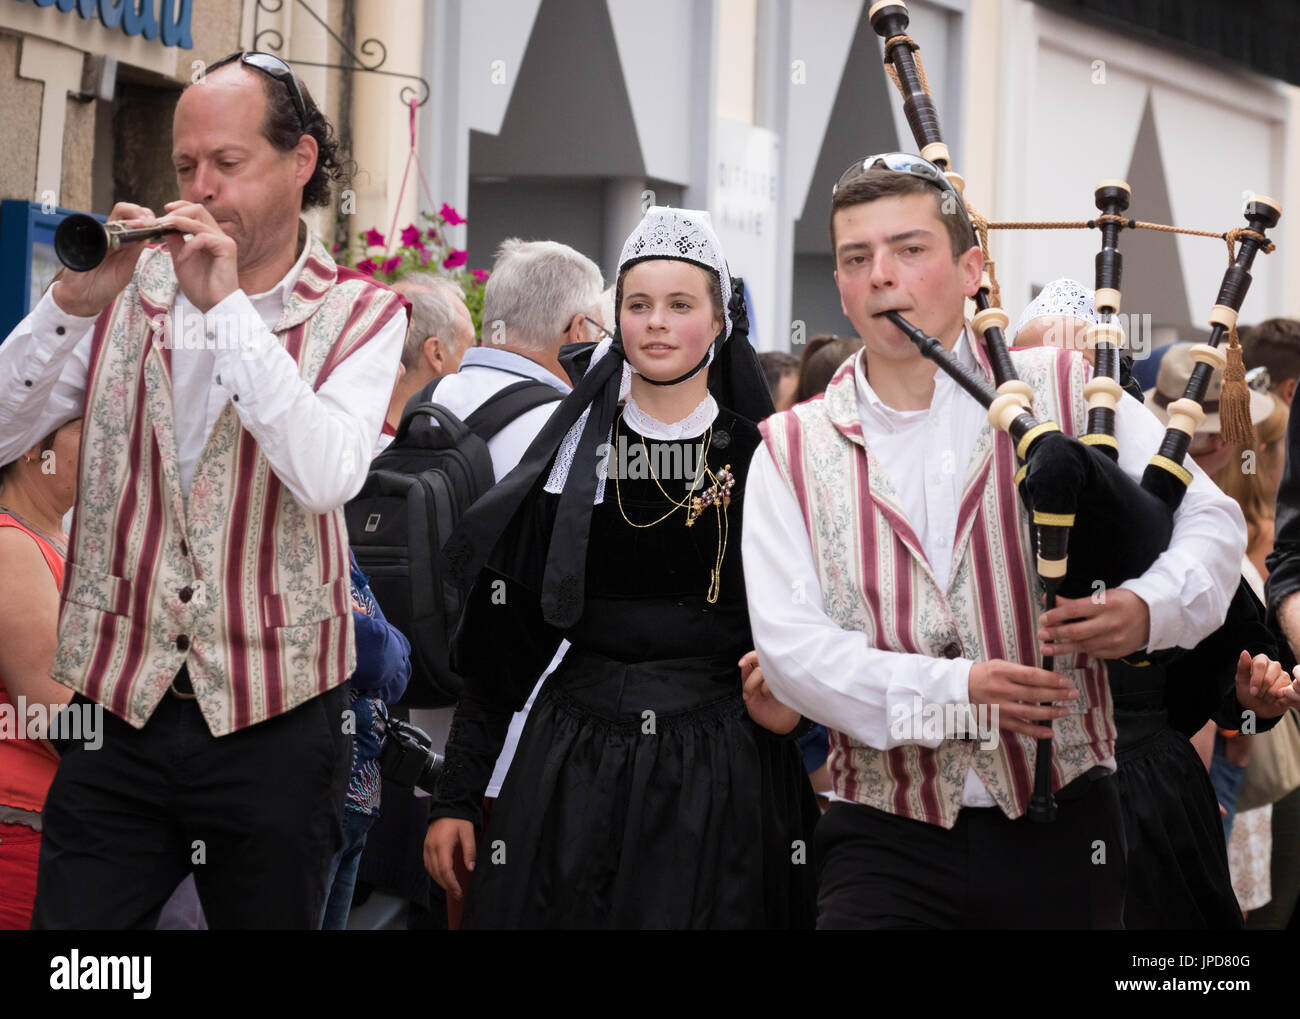 French musiciansand women in traditional costume, La Fête des Brodeuses, Pont L'Abbe, Bigouden, Finistere, Brittany, France Europe Stock Photo